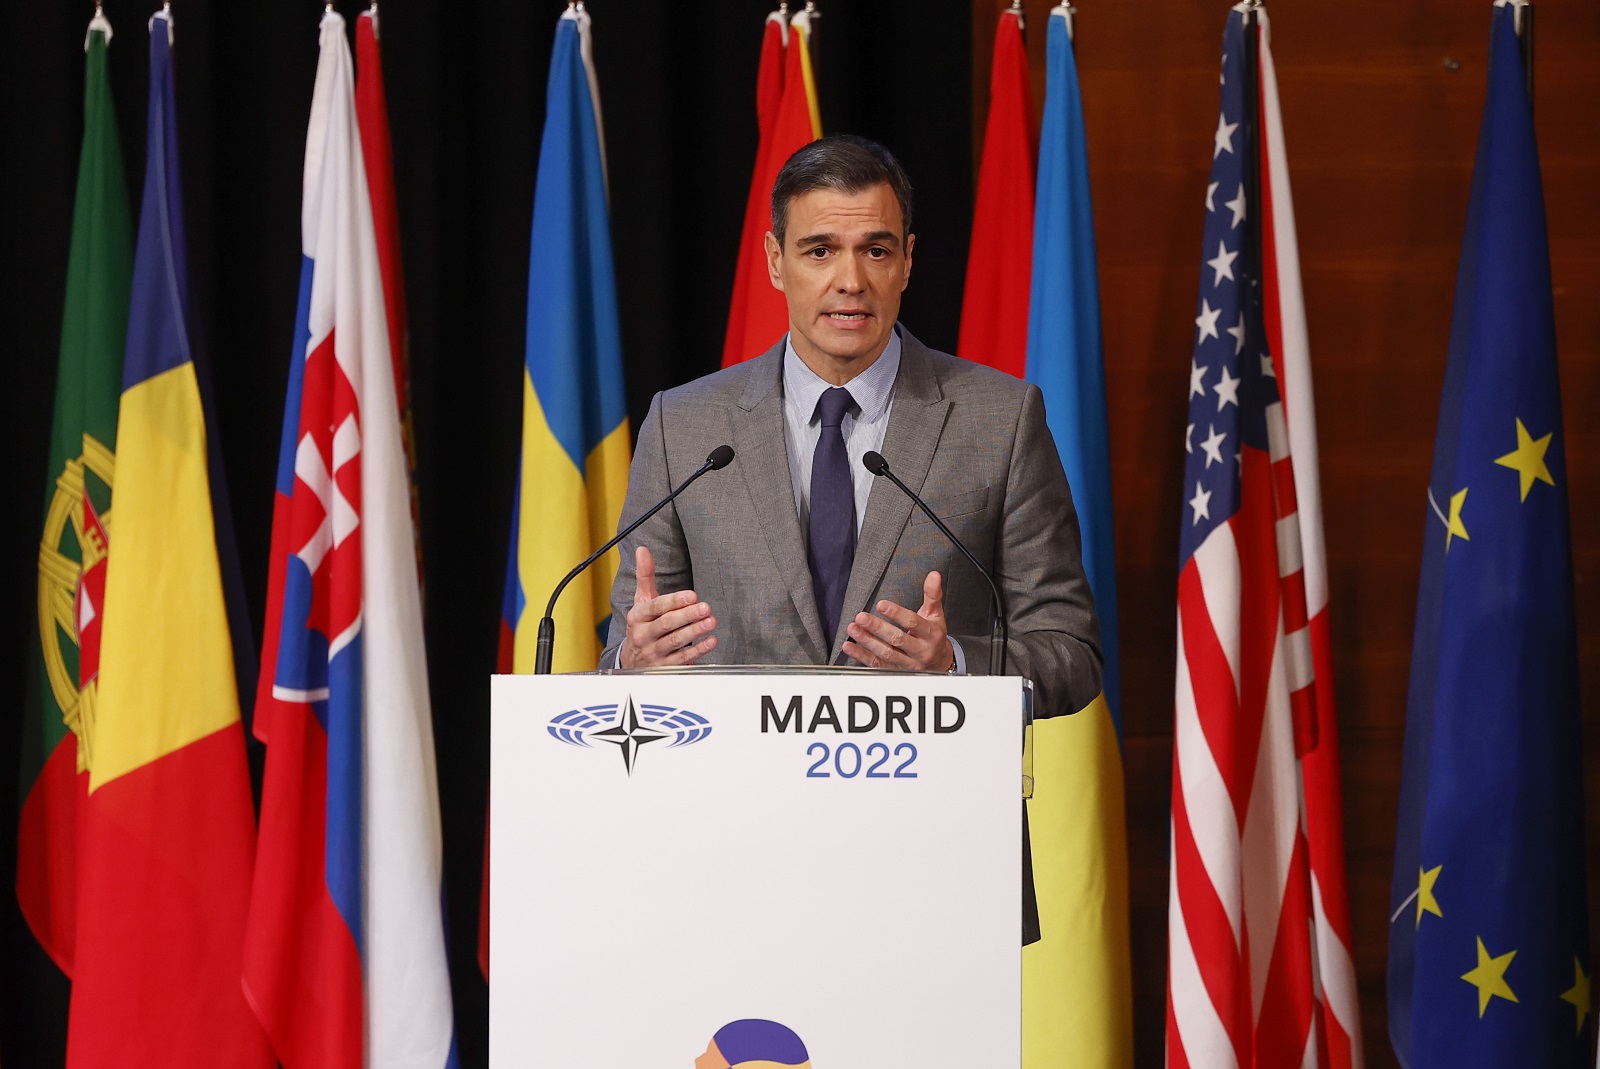 epa10317403 Spanish Prime Minister Pedro Sanchez delivers a speech during the plenary session of the 68th NATO Parliamentary Assembly in Madrid, Spain, 21 November 2022. NATO Parliamentary Assemblys Annual Session runs in Spains capital from 18 to 21 November 2022, with the participation of NATO Secretary General Jens Stoltenberg and, by telematic means, the President of Ukraine, Volodymyr Zelensky.  EPA/CHEMA MOYA